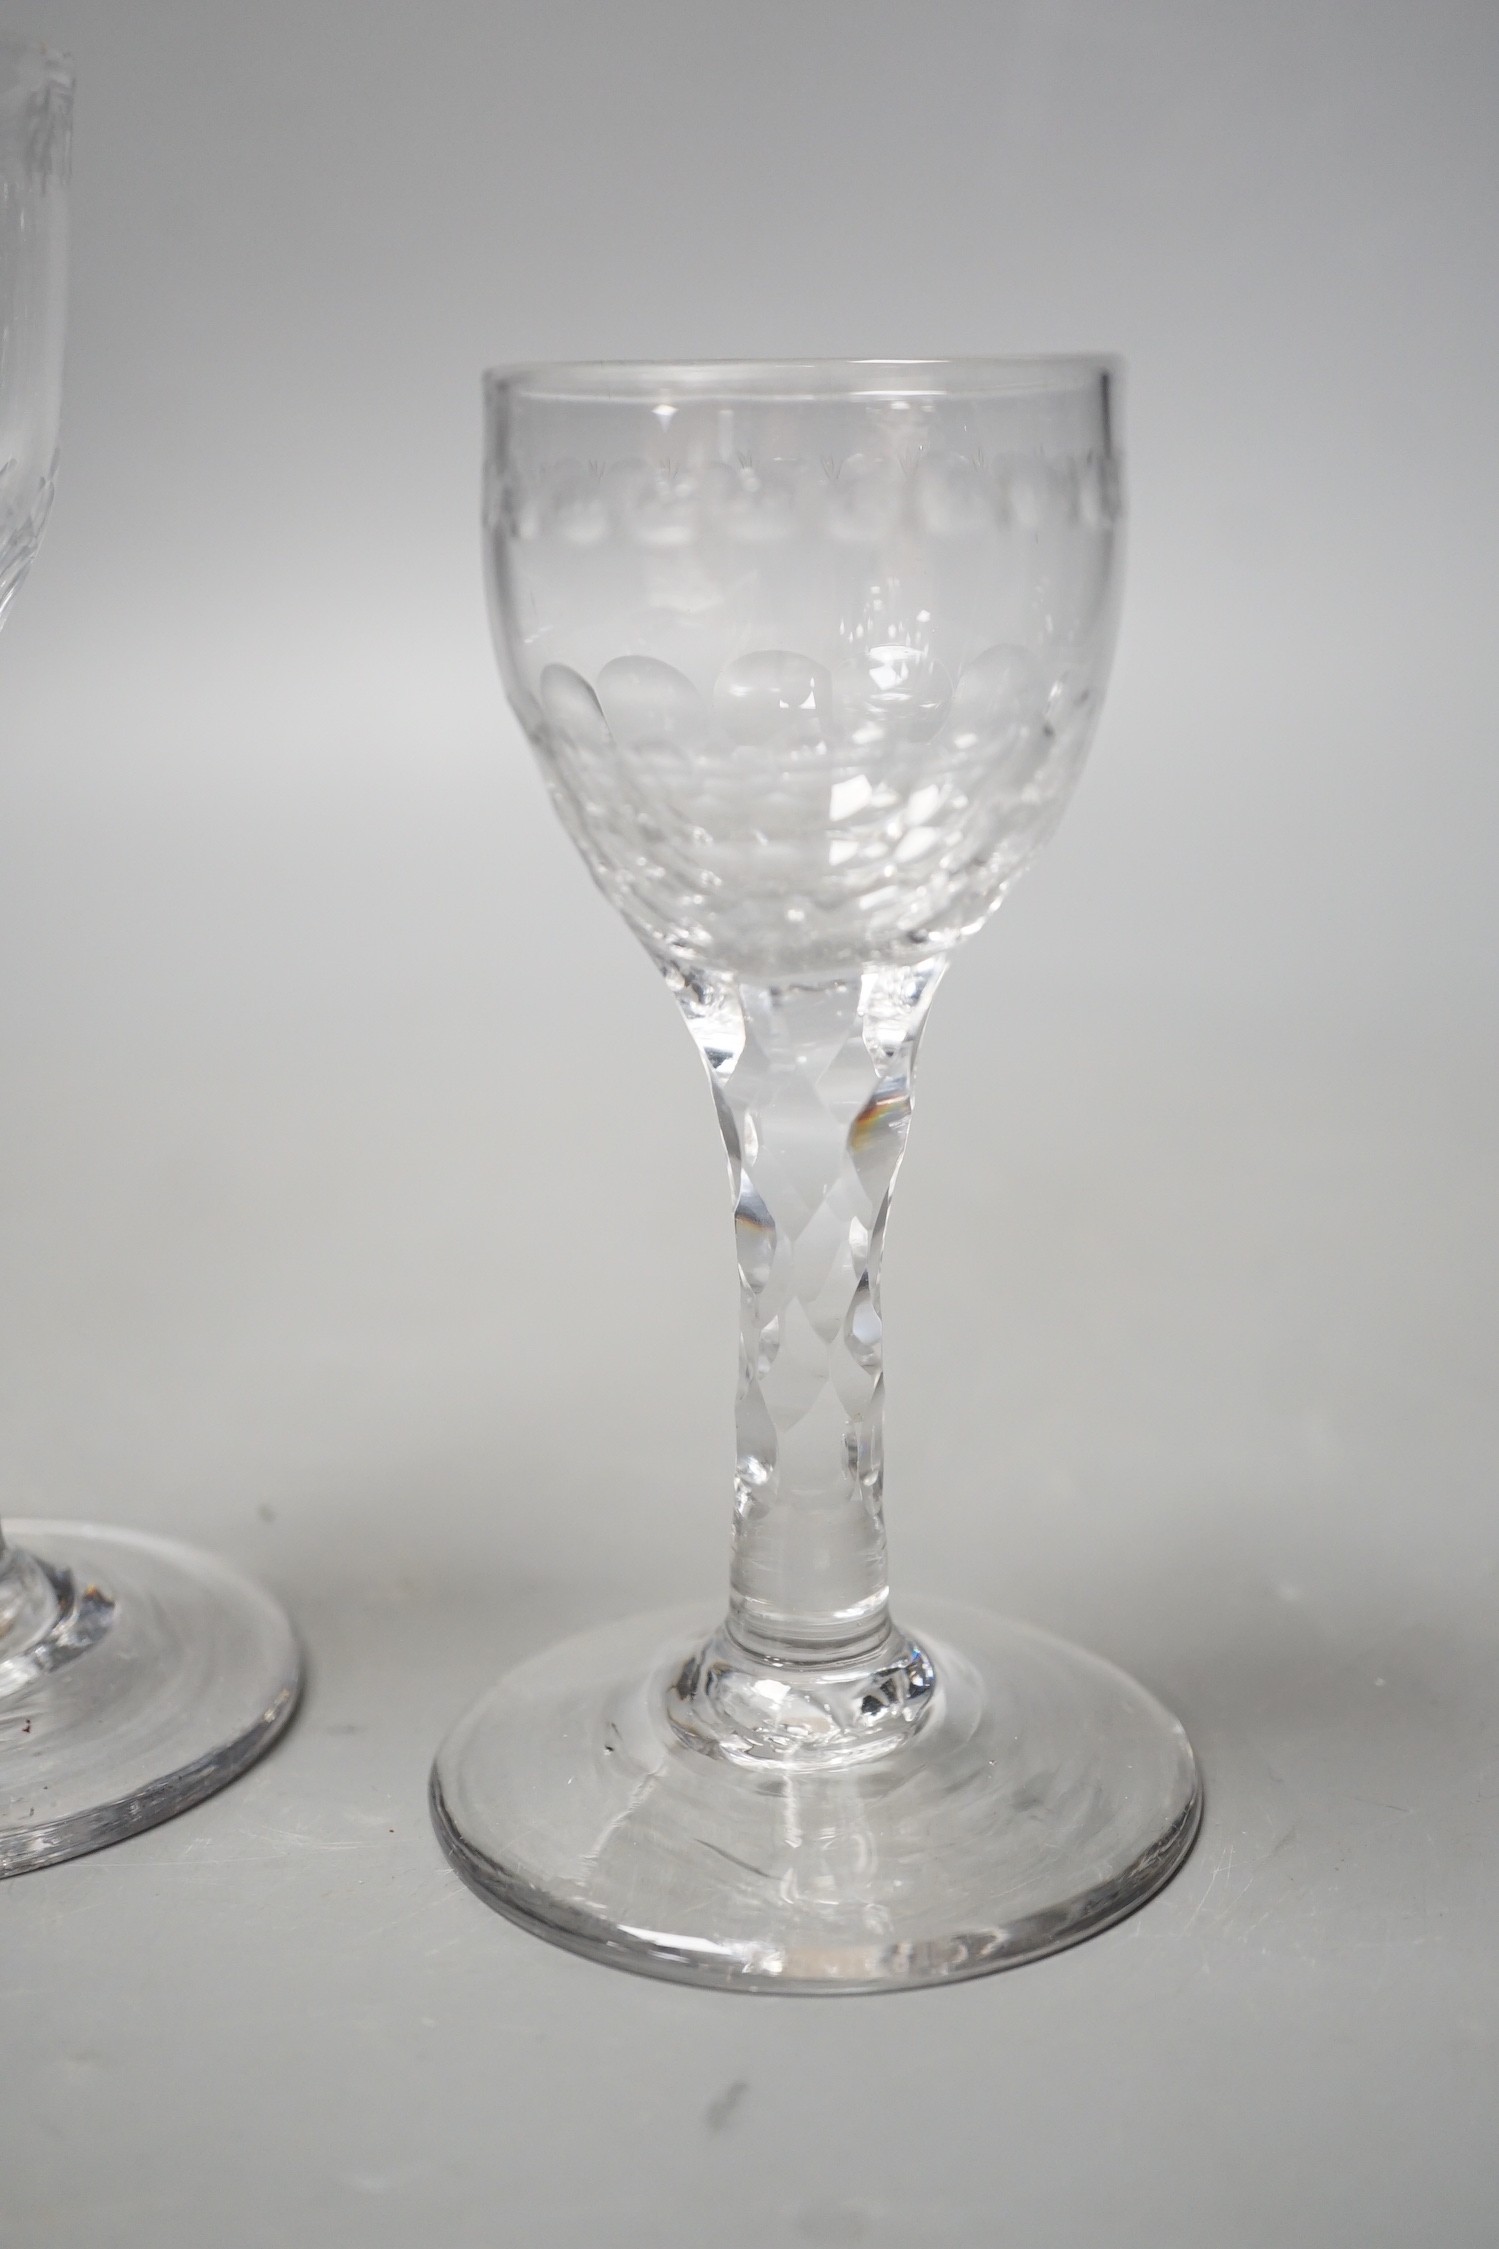 Three George III facet stem ‘OXO’ drinking glasses, tallest 15cms high